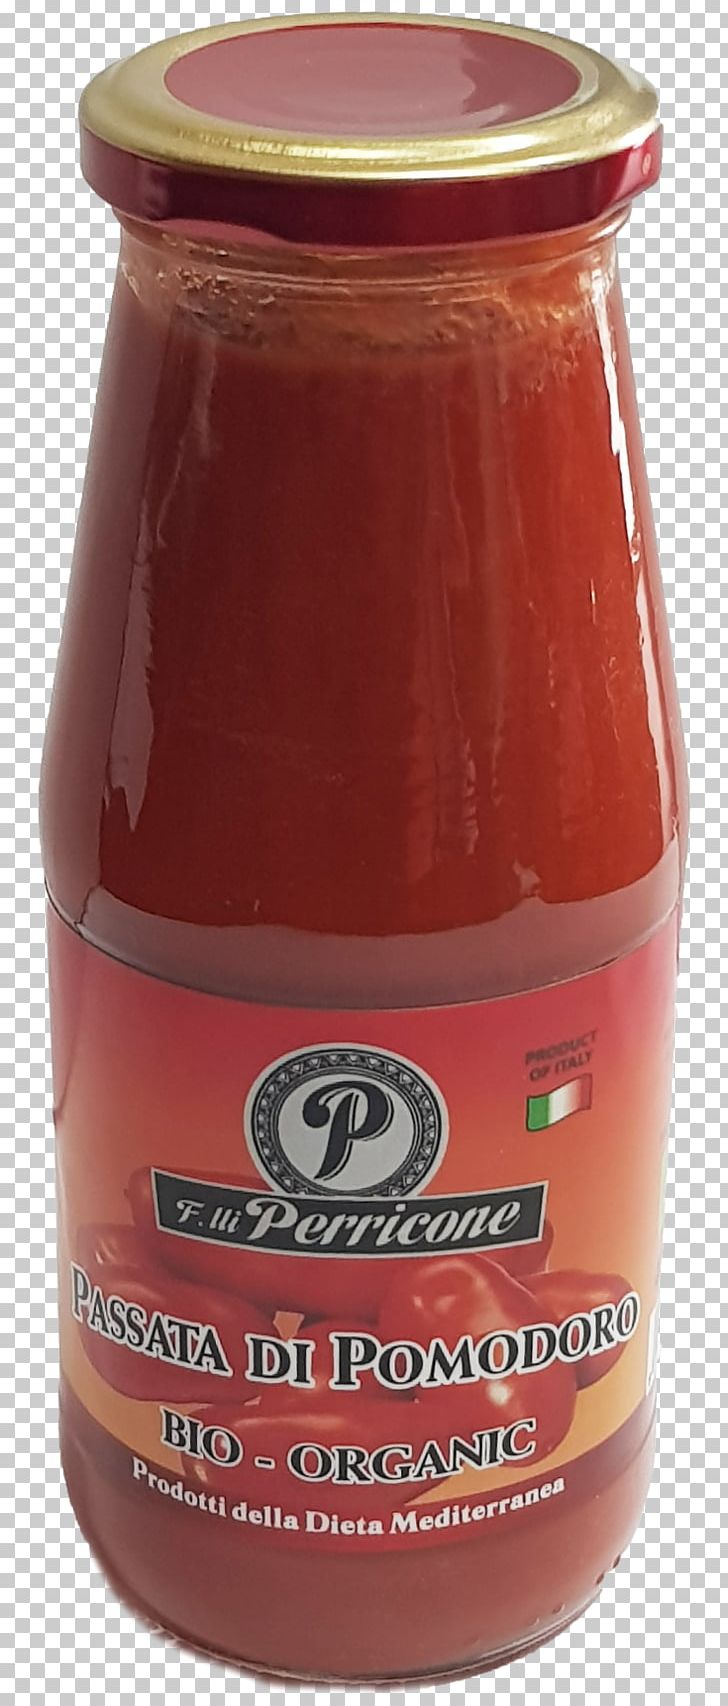 Tomate Frito Tomato Purée Sweet Chili Sauce Ketchup PNG, Clipart, Aroma, Condiment, Fruit, Fruit Preserve, Ingredient Free PNG Download